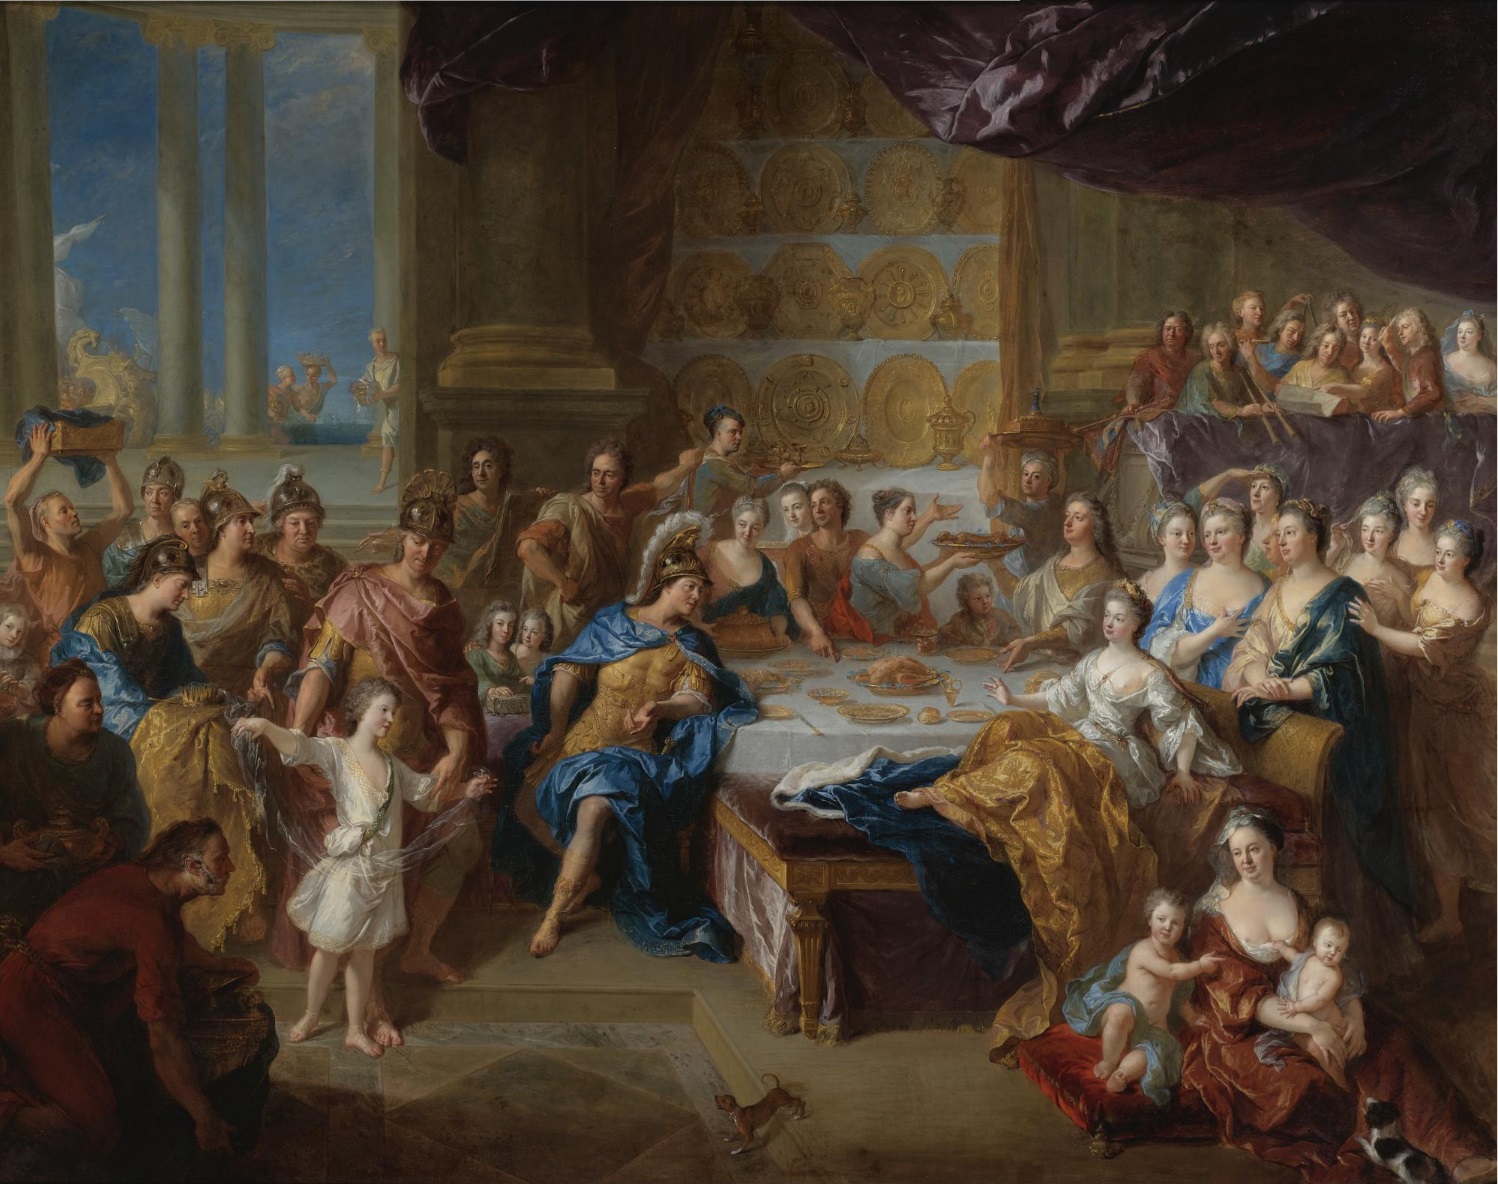 The Feast of Dido and Aeneas by François de Troy 1704